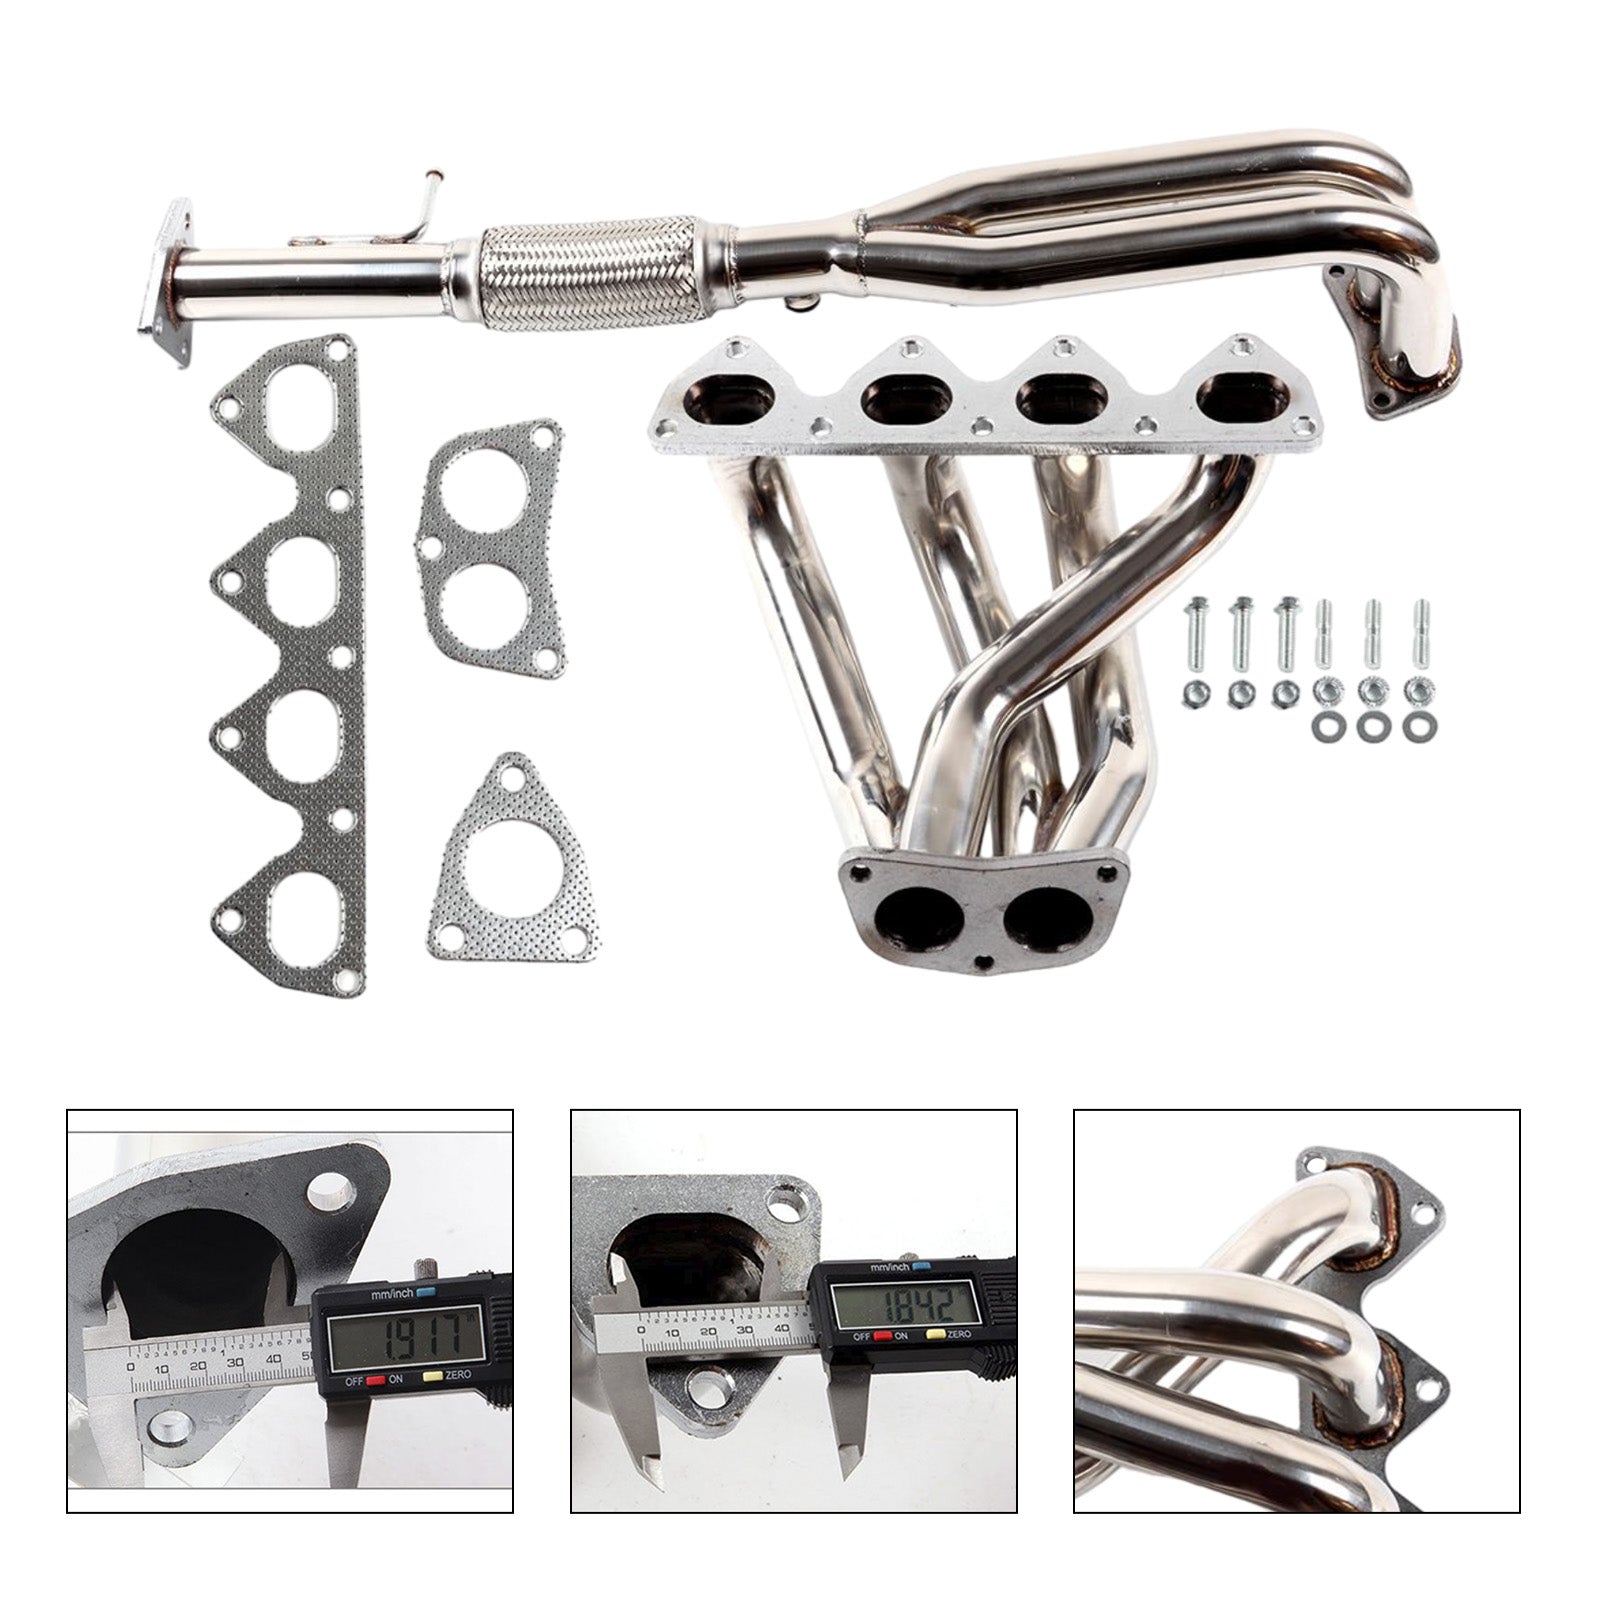 Honda 1993-1996 Prelude 2.2L HDSHP92H22 Steel Manifold Exhaust Racing Header Stainless